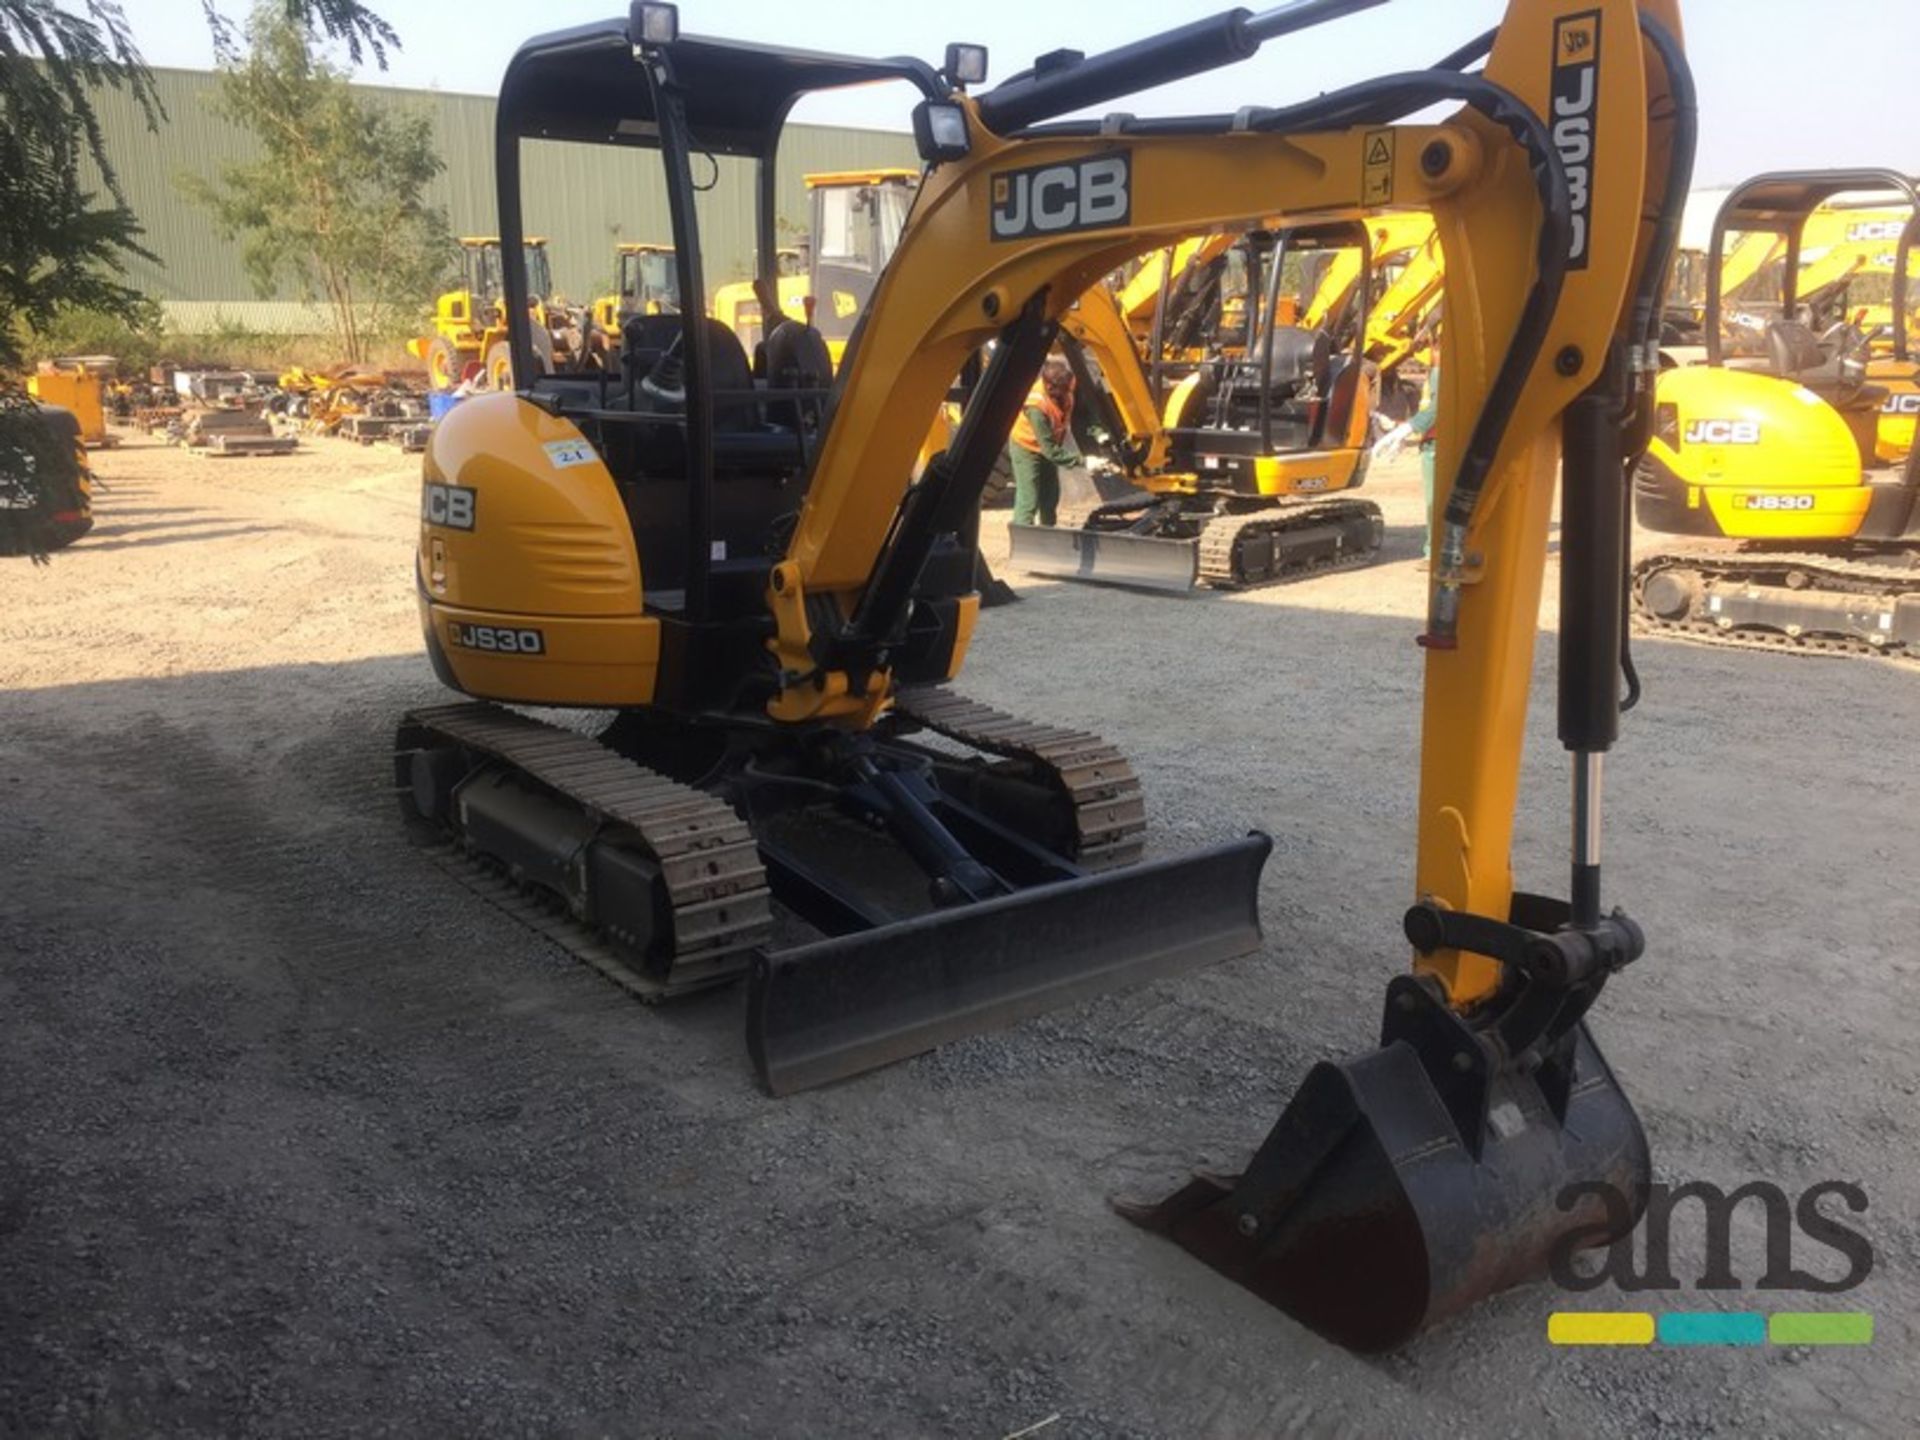 *FOR EXPORT ONLY* 2014, JCB 8026CTS Excavator, Serial No. 305249 c/w Steel Tracks, Single Auxiliary, - Image 4 of 18